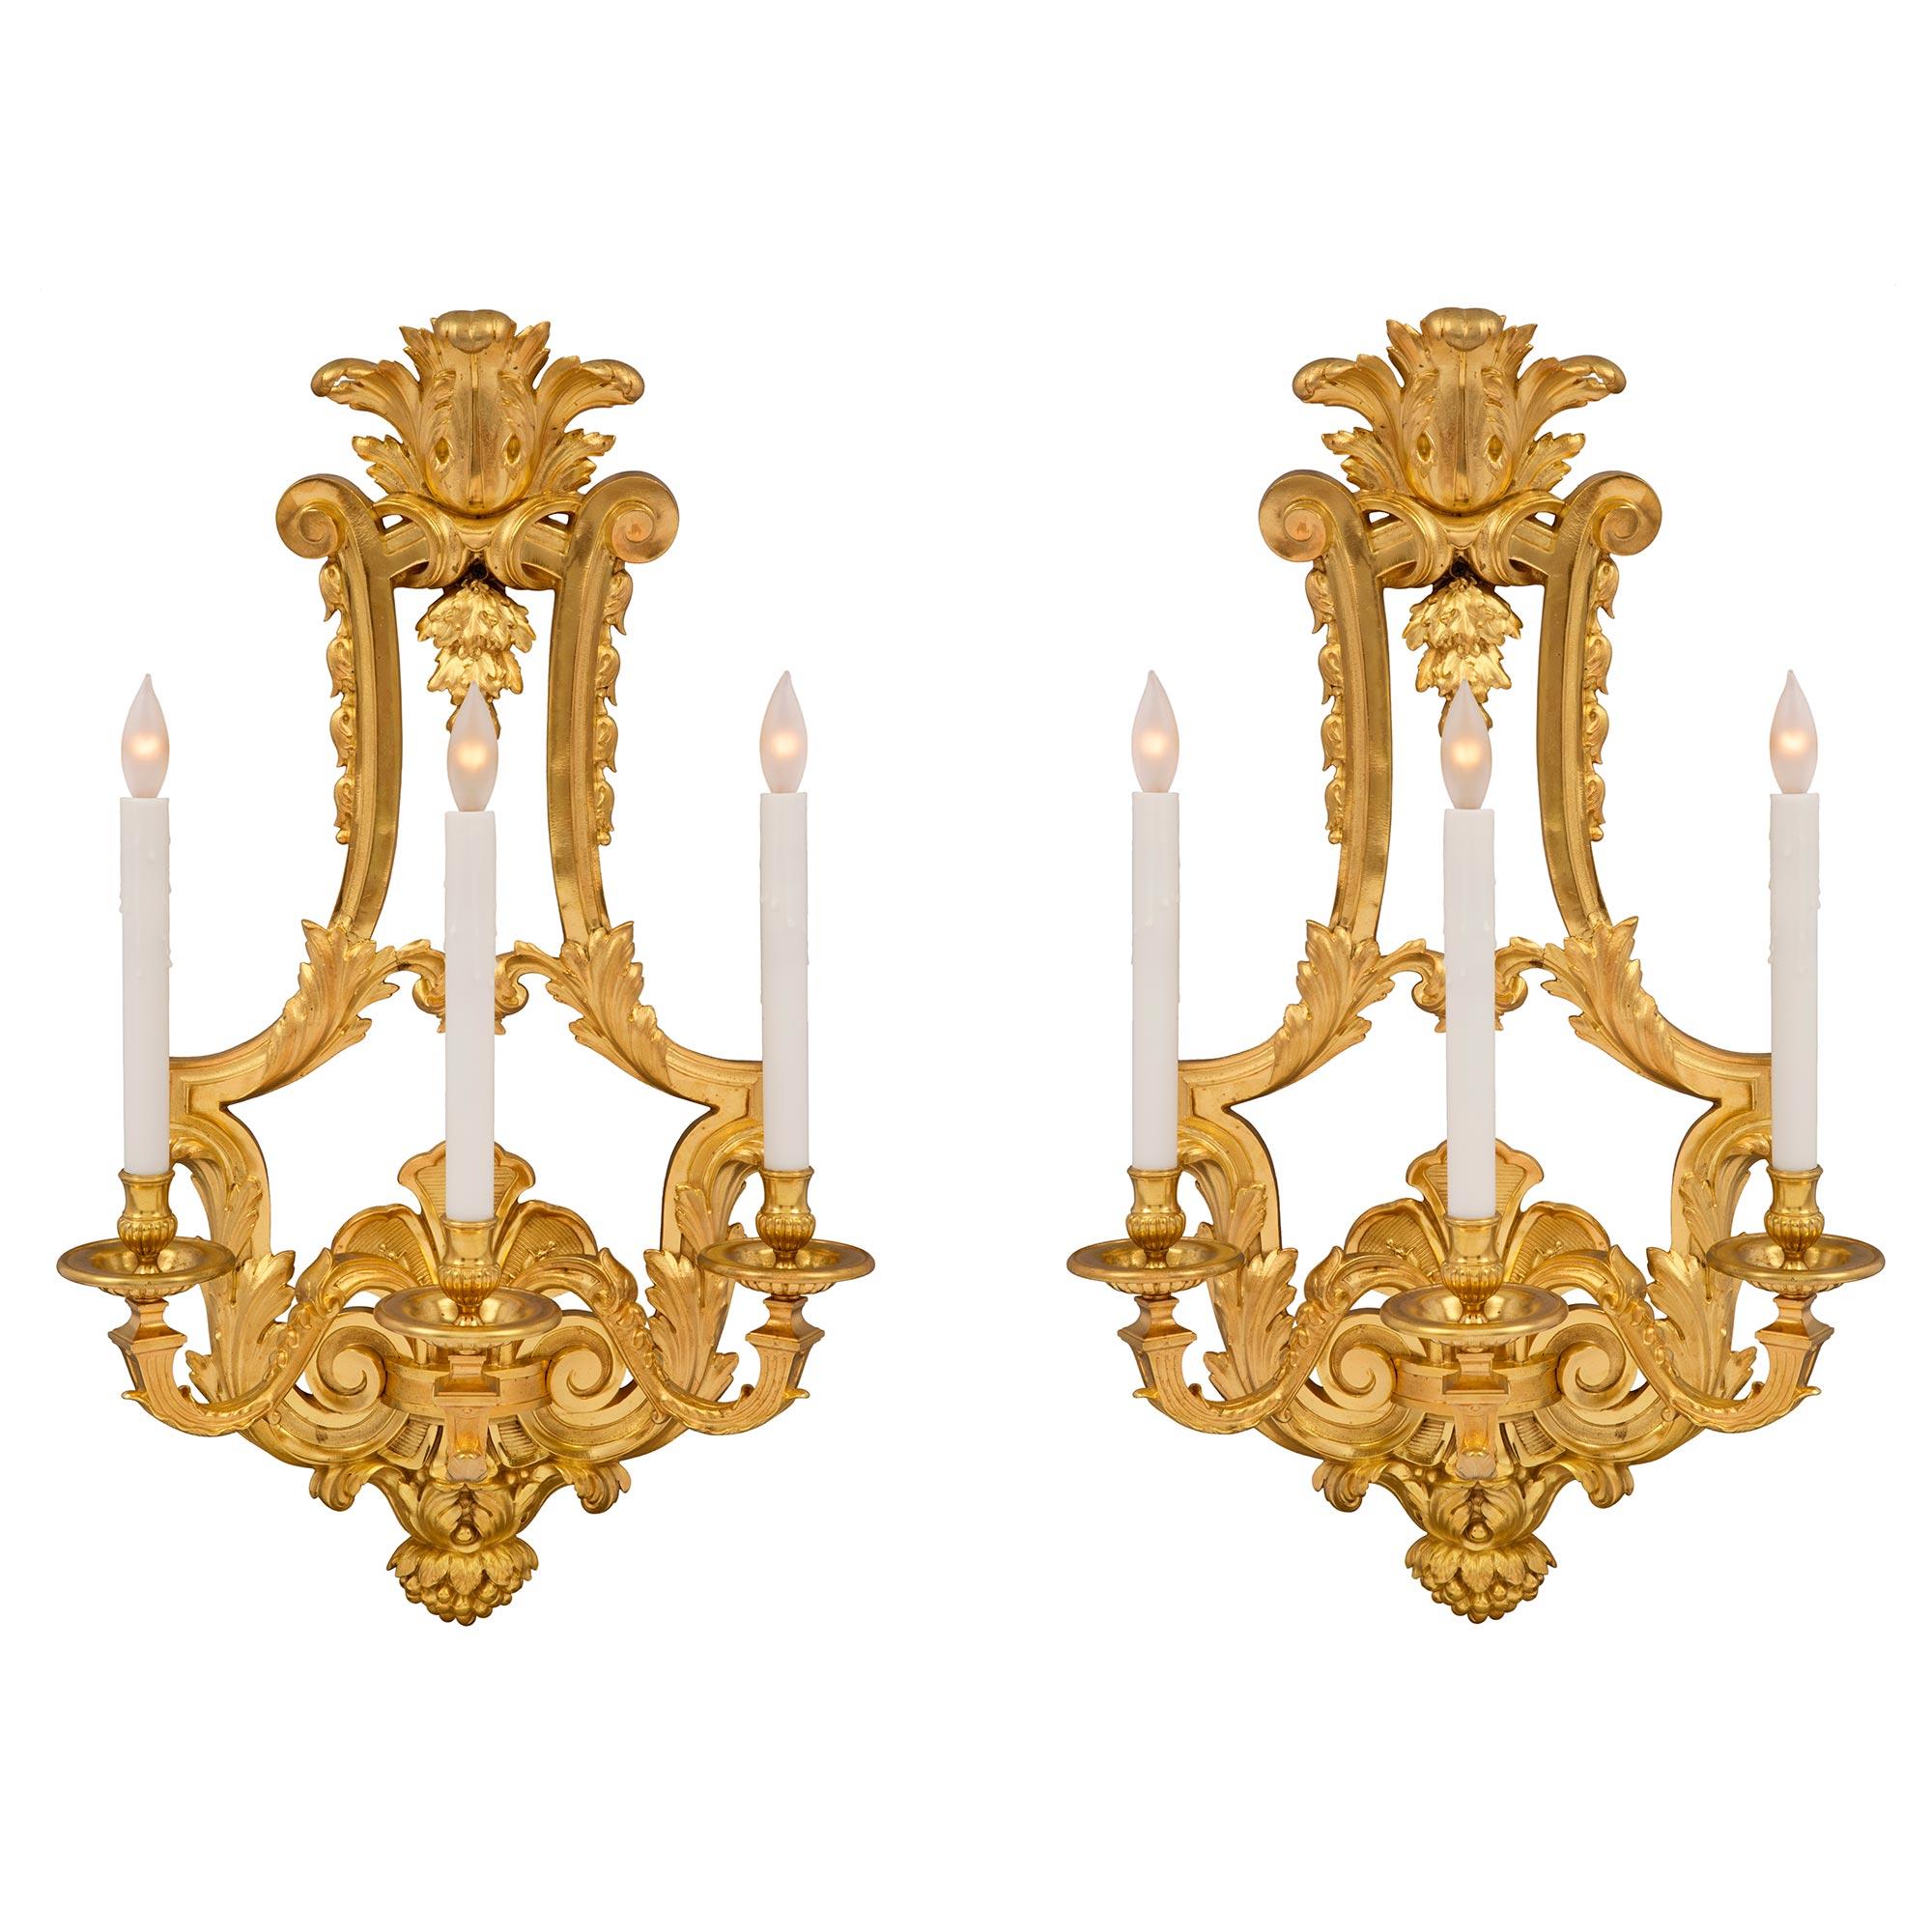 A striking and high quality pair of French 19th century Louis XVI st. three arm ormolu sconces. Each sconce is centered by an impressive berried foliate finial below large richly chased scrolled acanthus leaves. The three elegantly scrolled arms